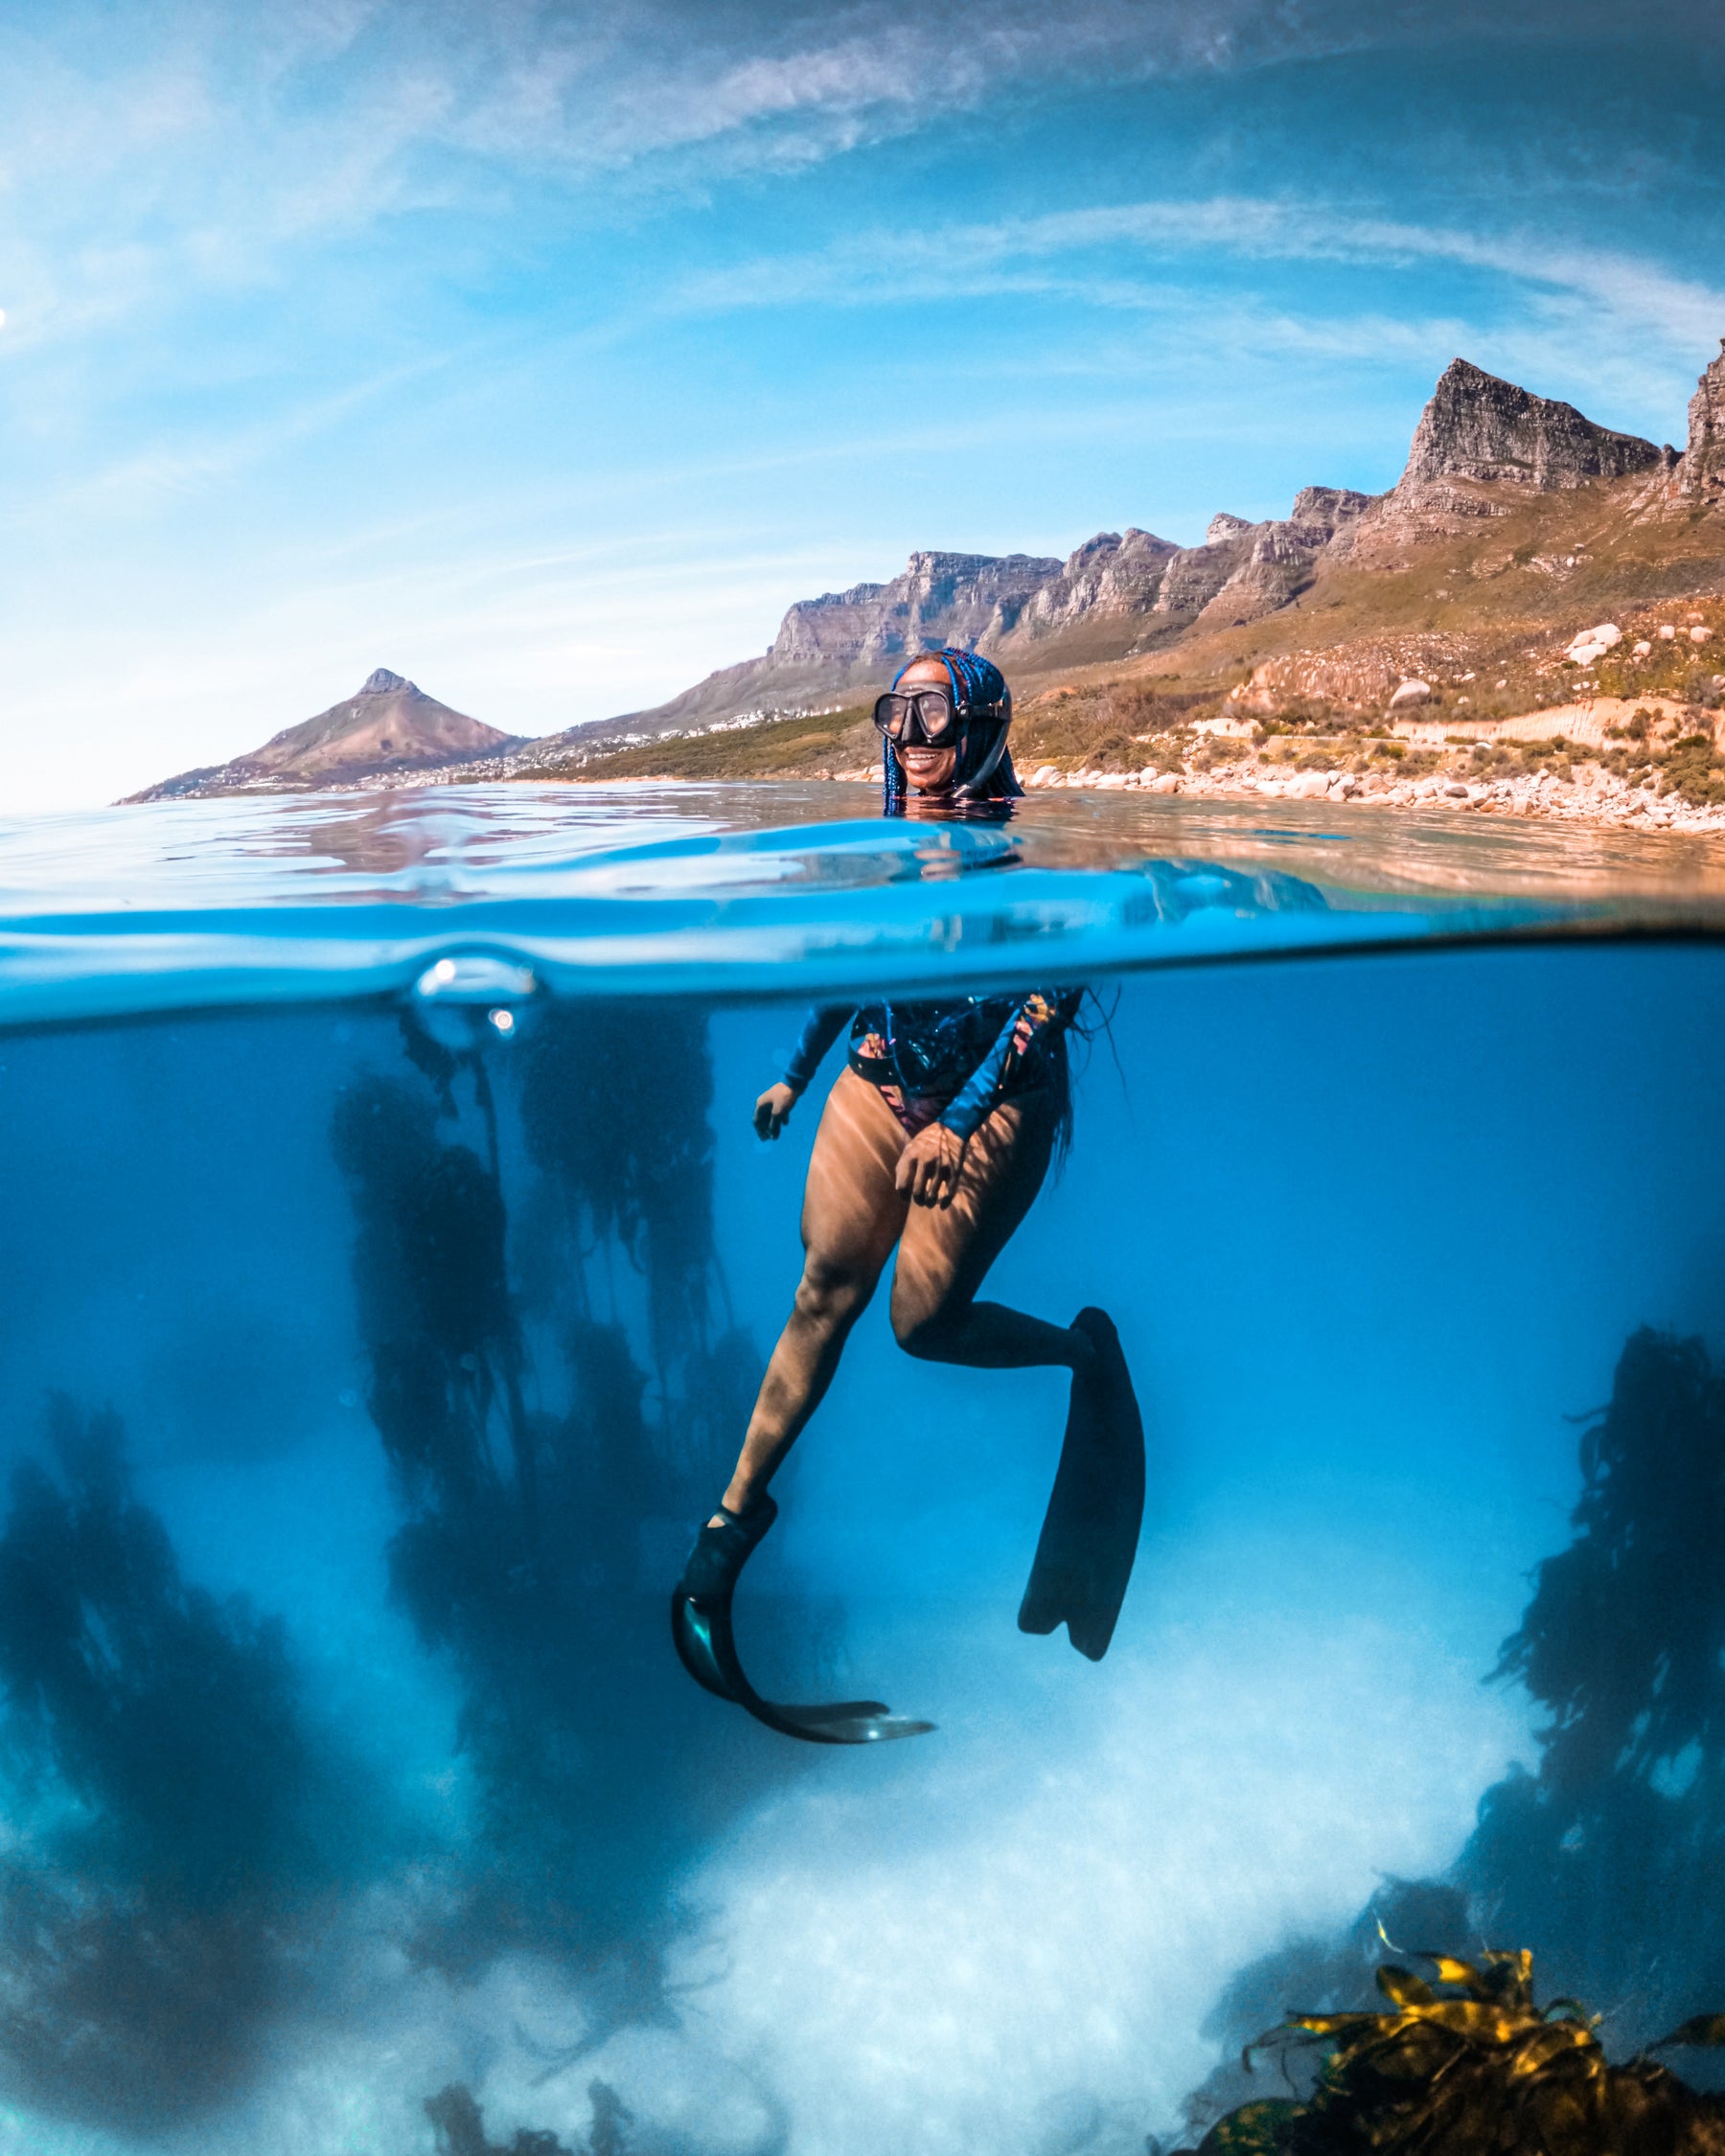 Can you take pictures underwater with the iPhone 14 Pro Max in 2023?